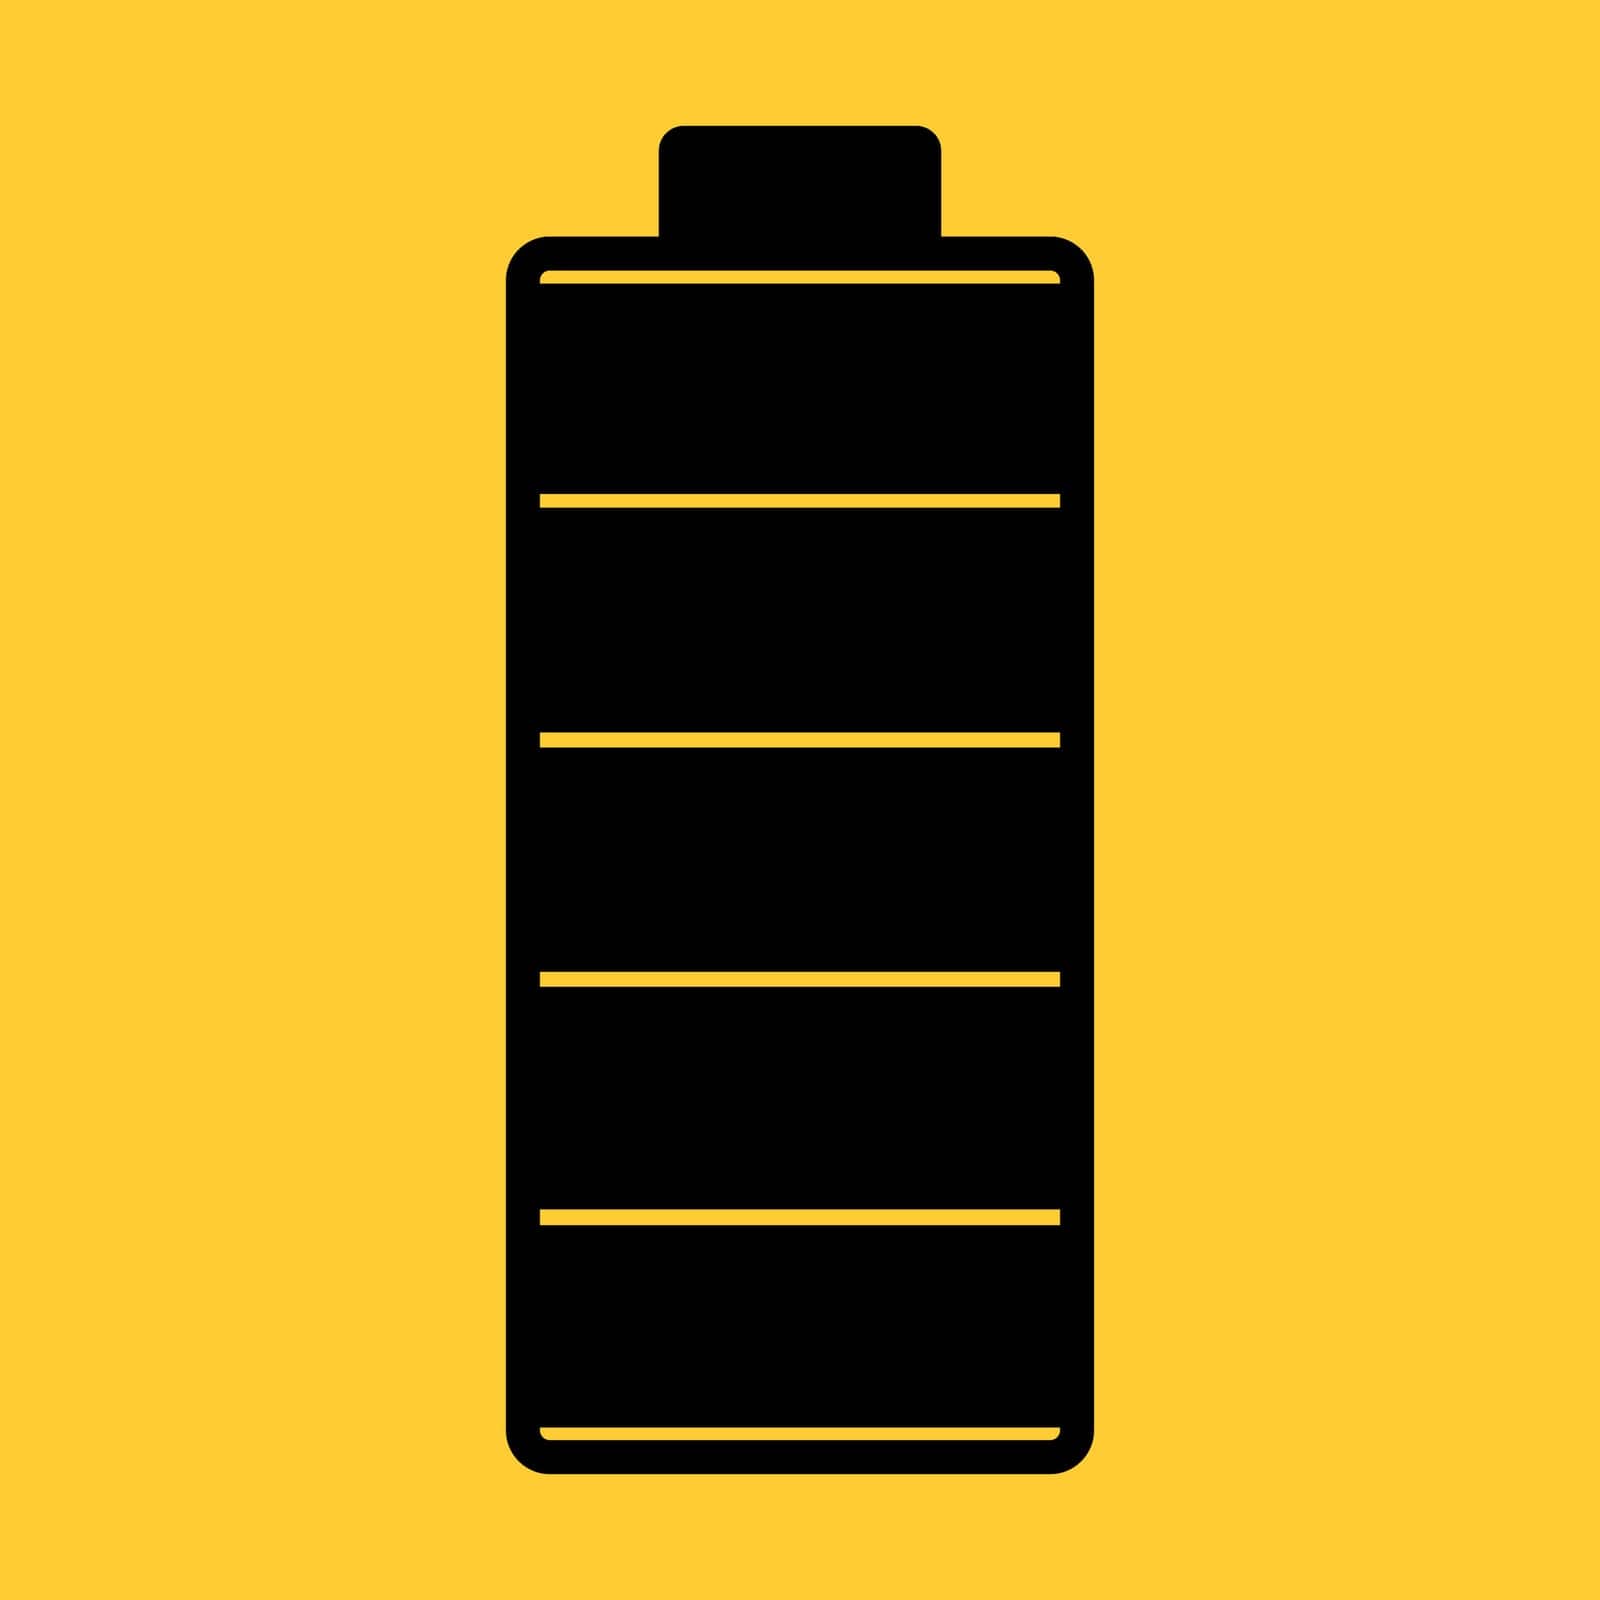 An illustration of a fully charged battery. Black and yellow colors. Vector icon.